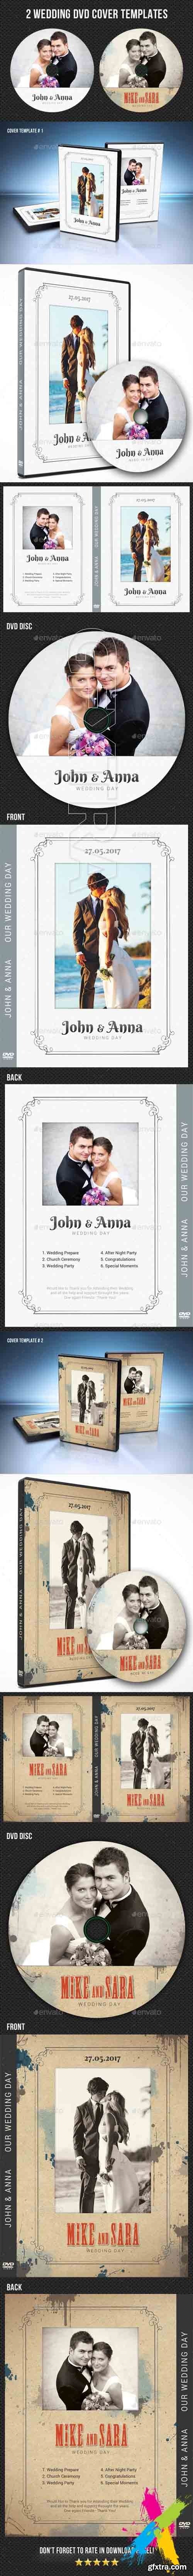 GraphicRiver - Wedding DVD Cover Template 23 20371740